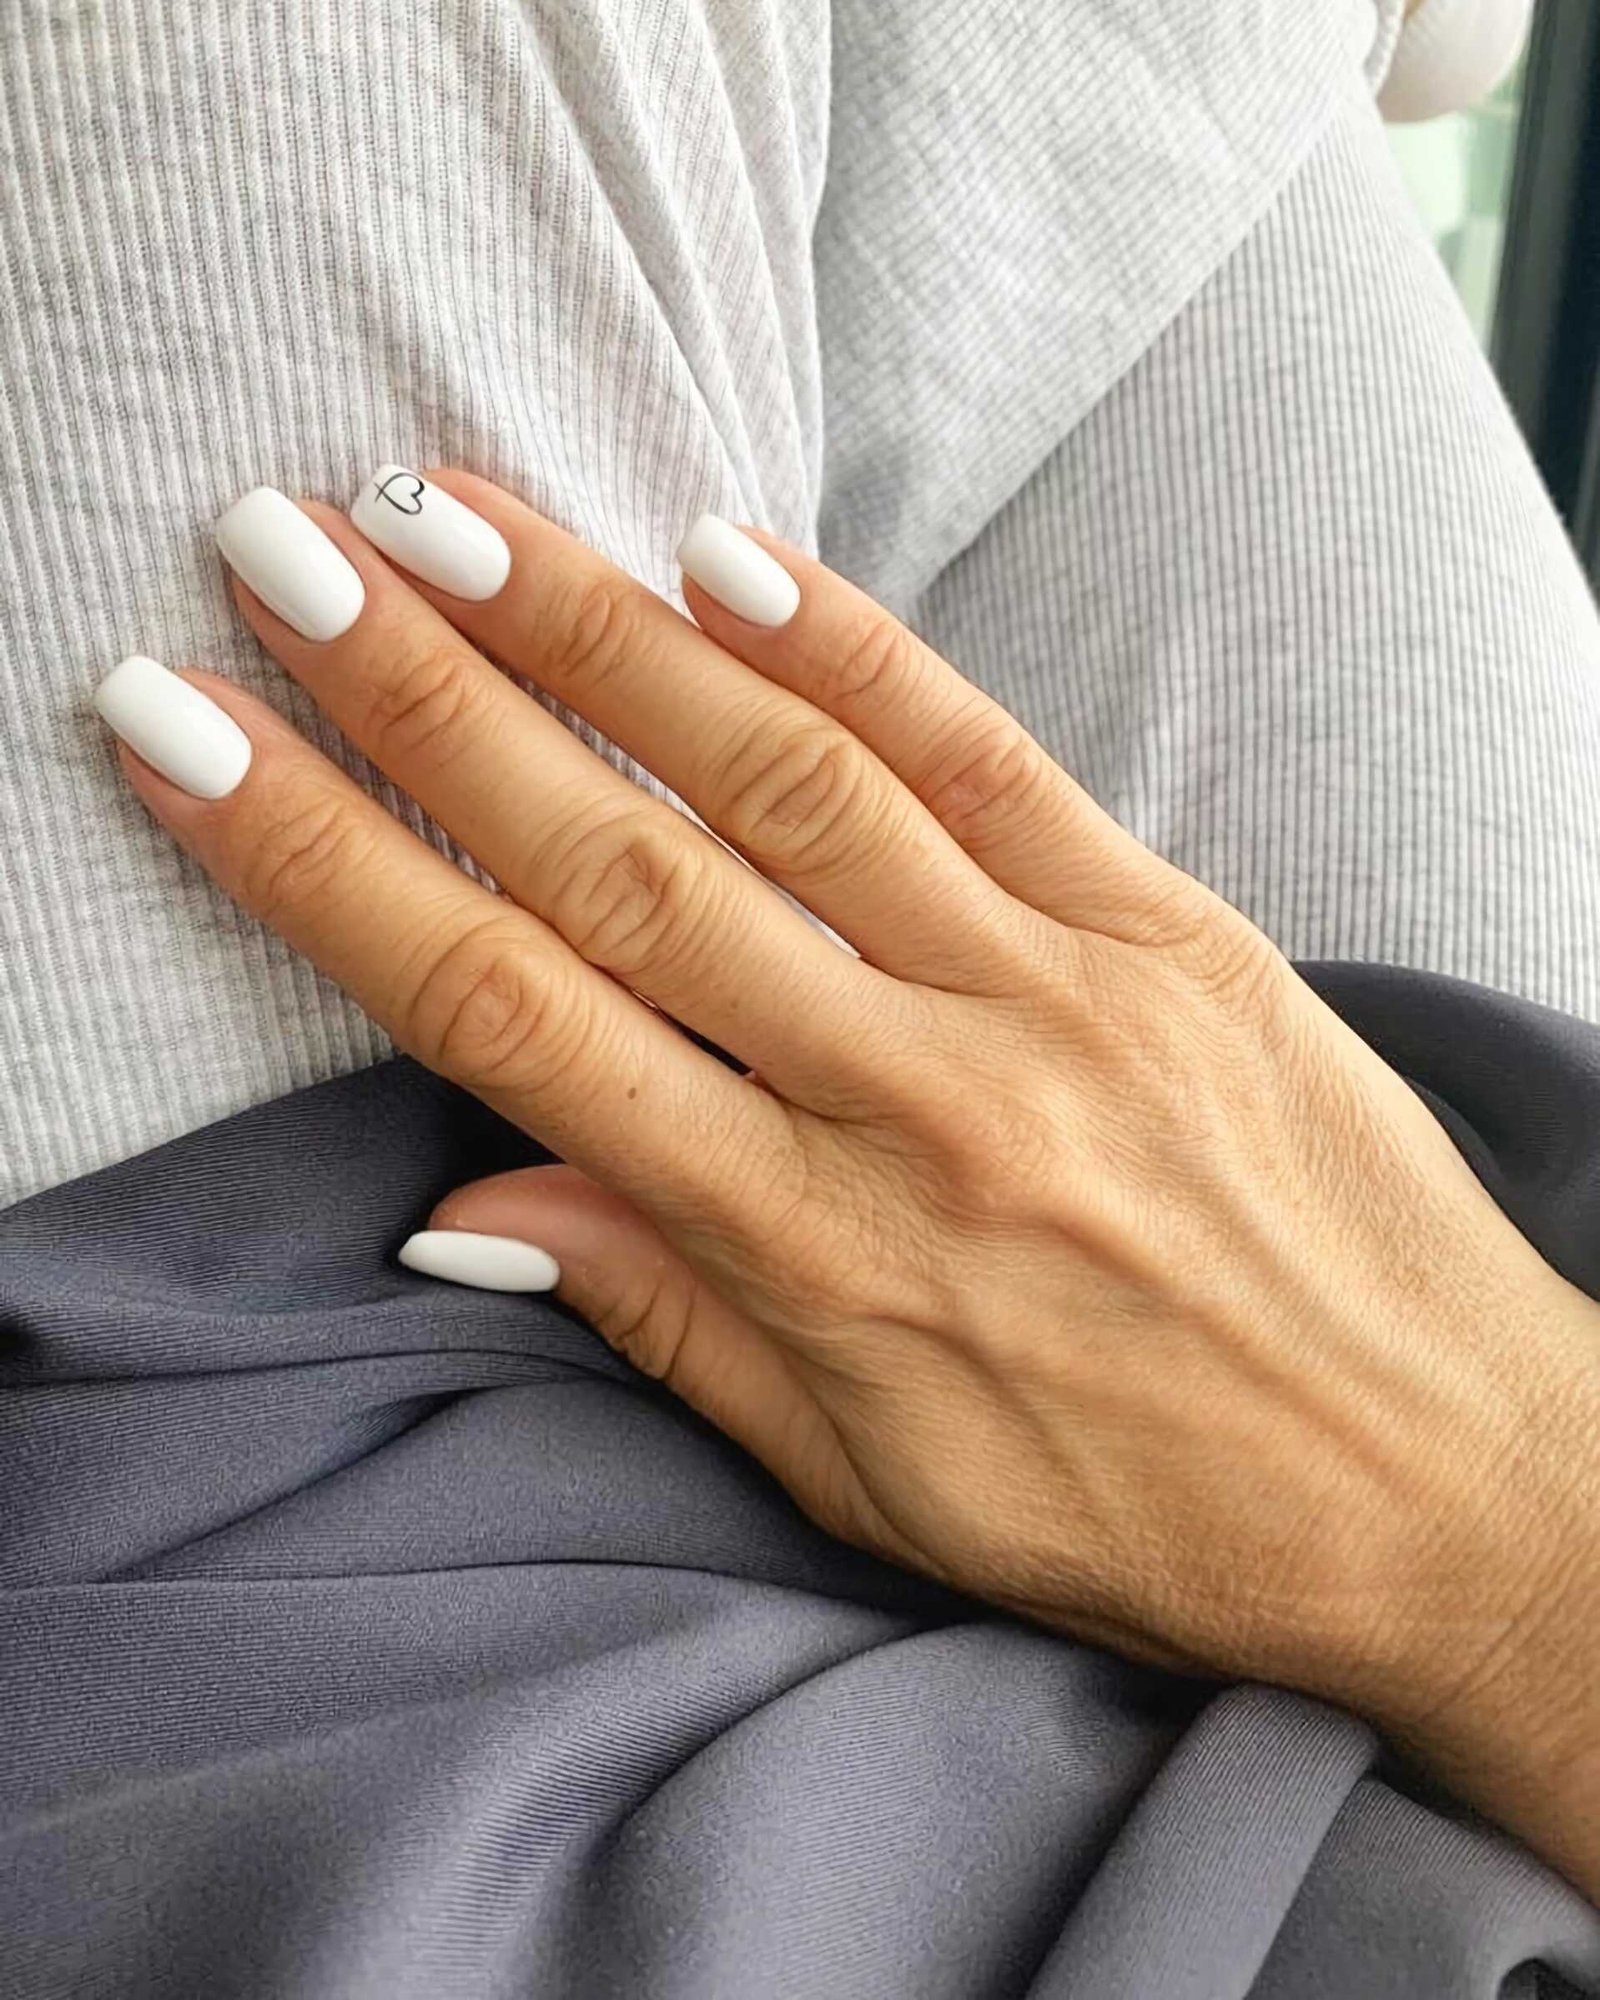 trendy short white nails with a heart